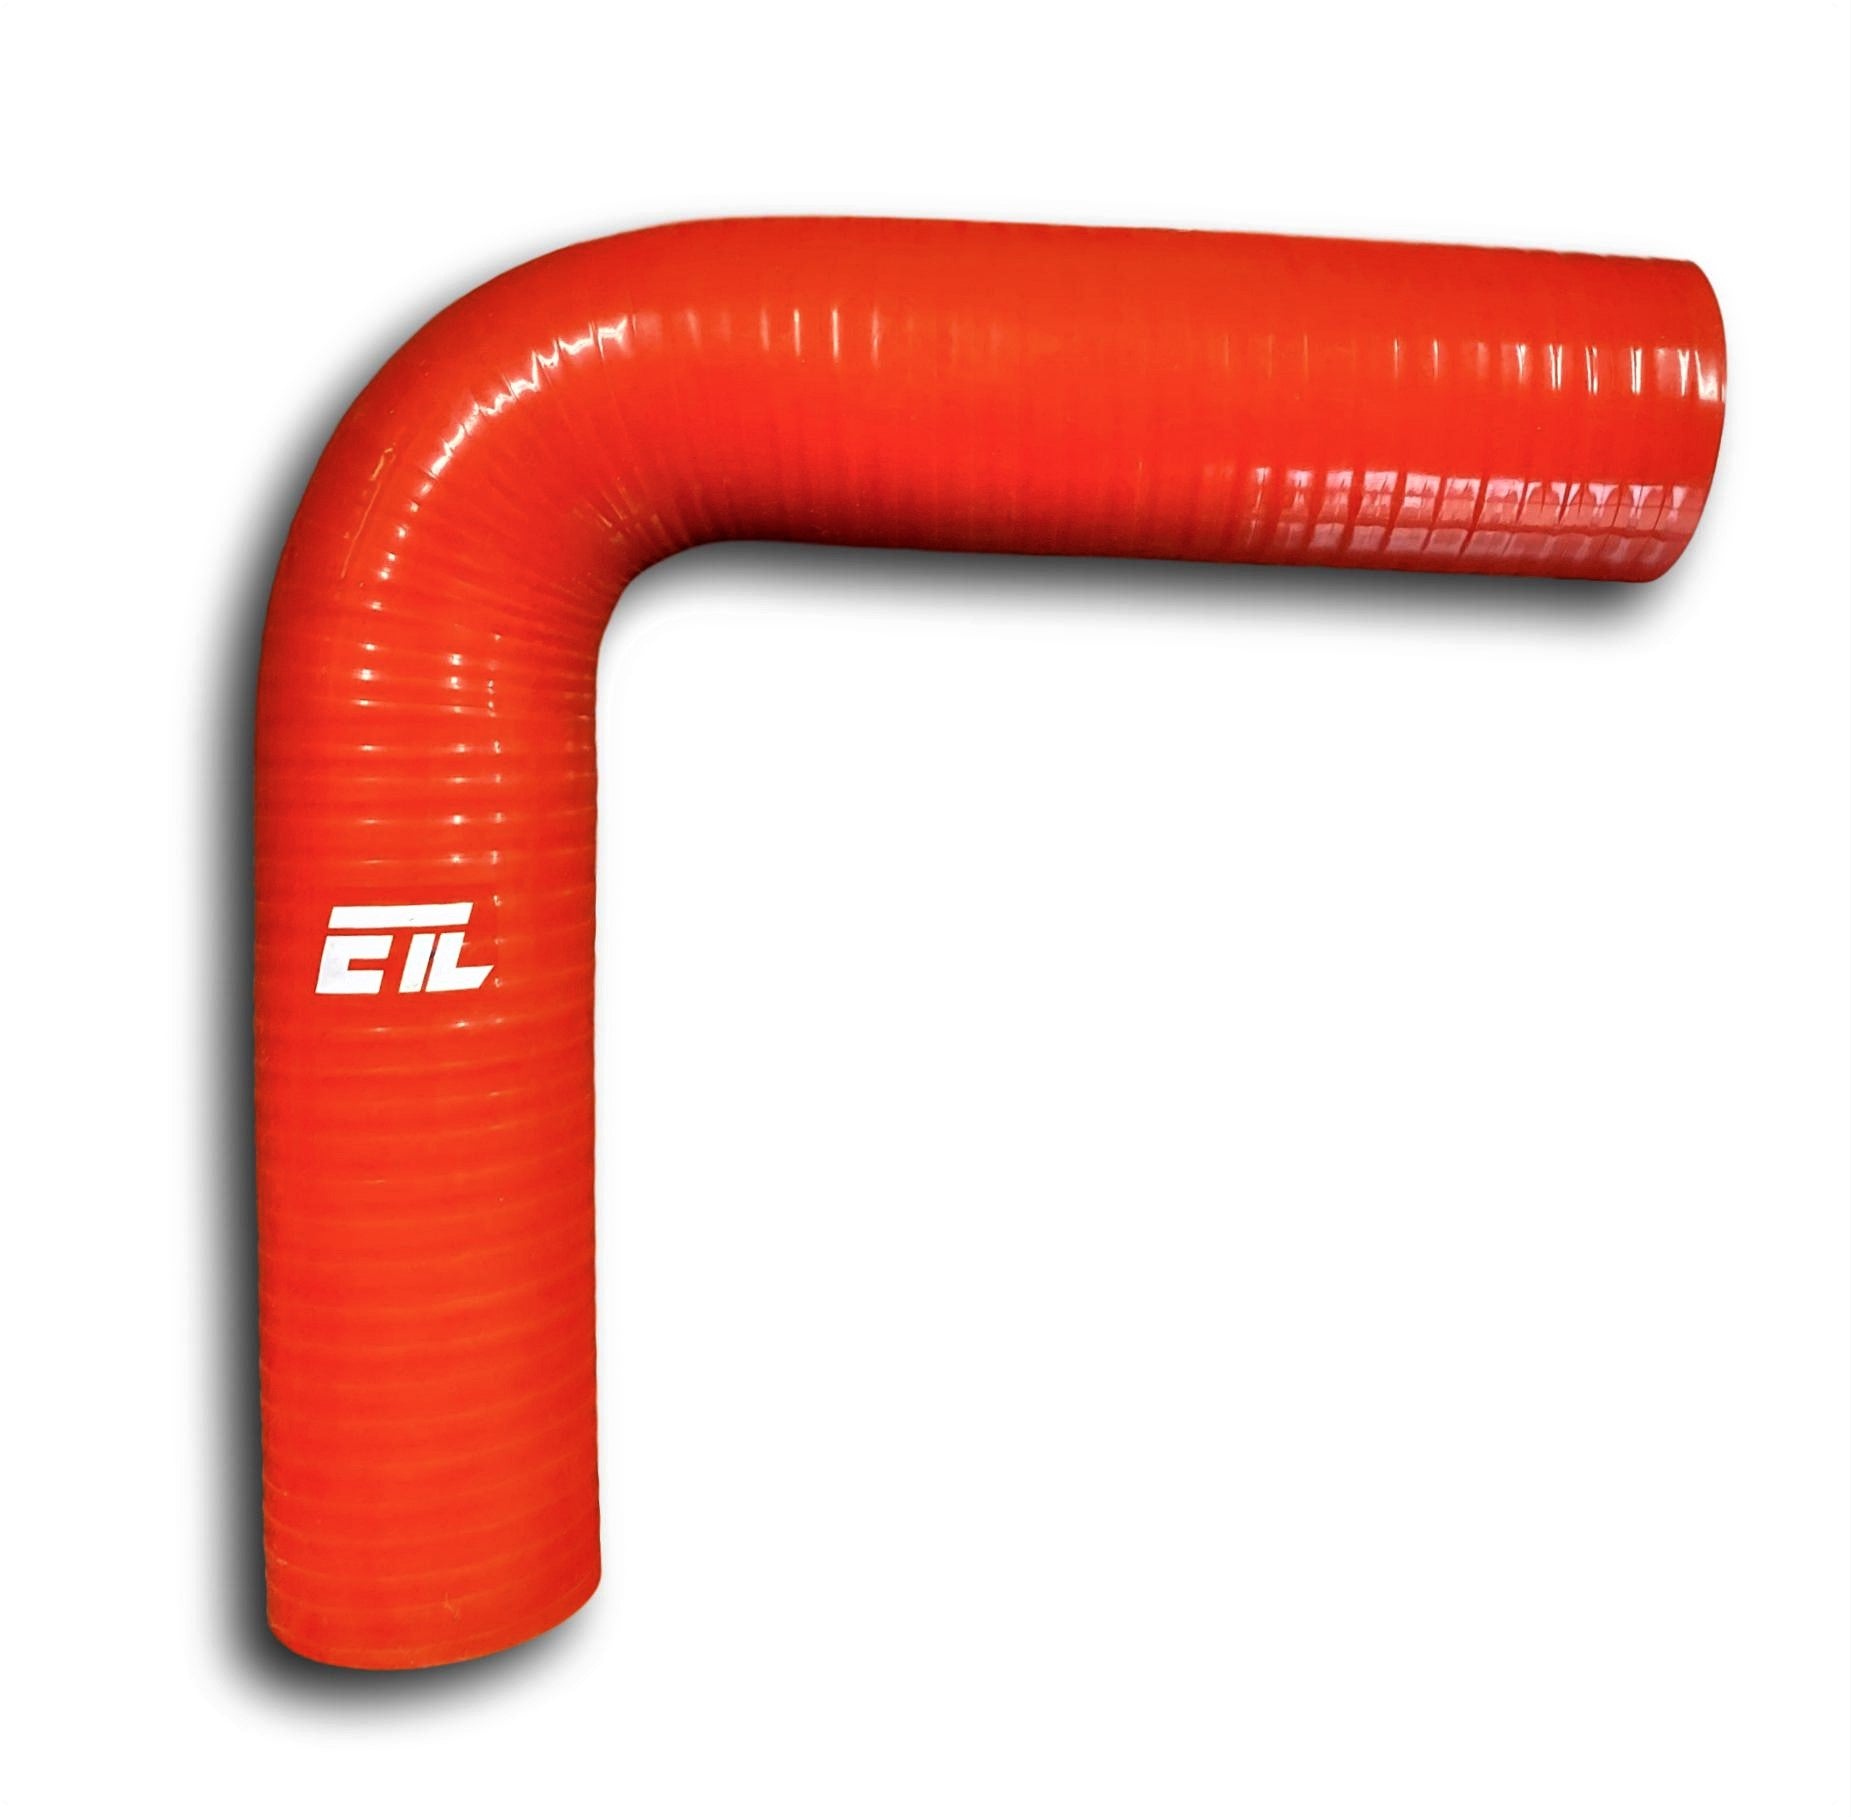 ETL Performance 235028 Silicone Elbow 2.75 Inch 90 Degree Red